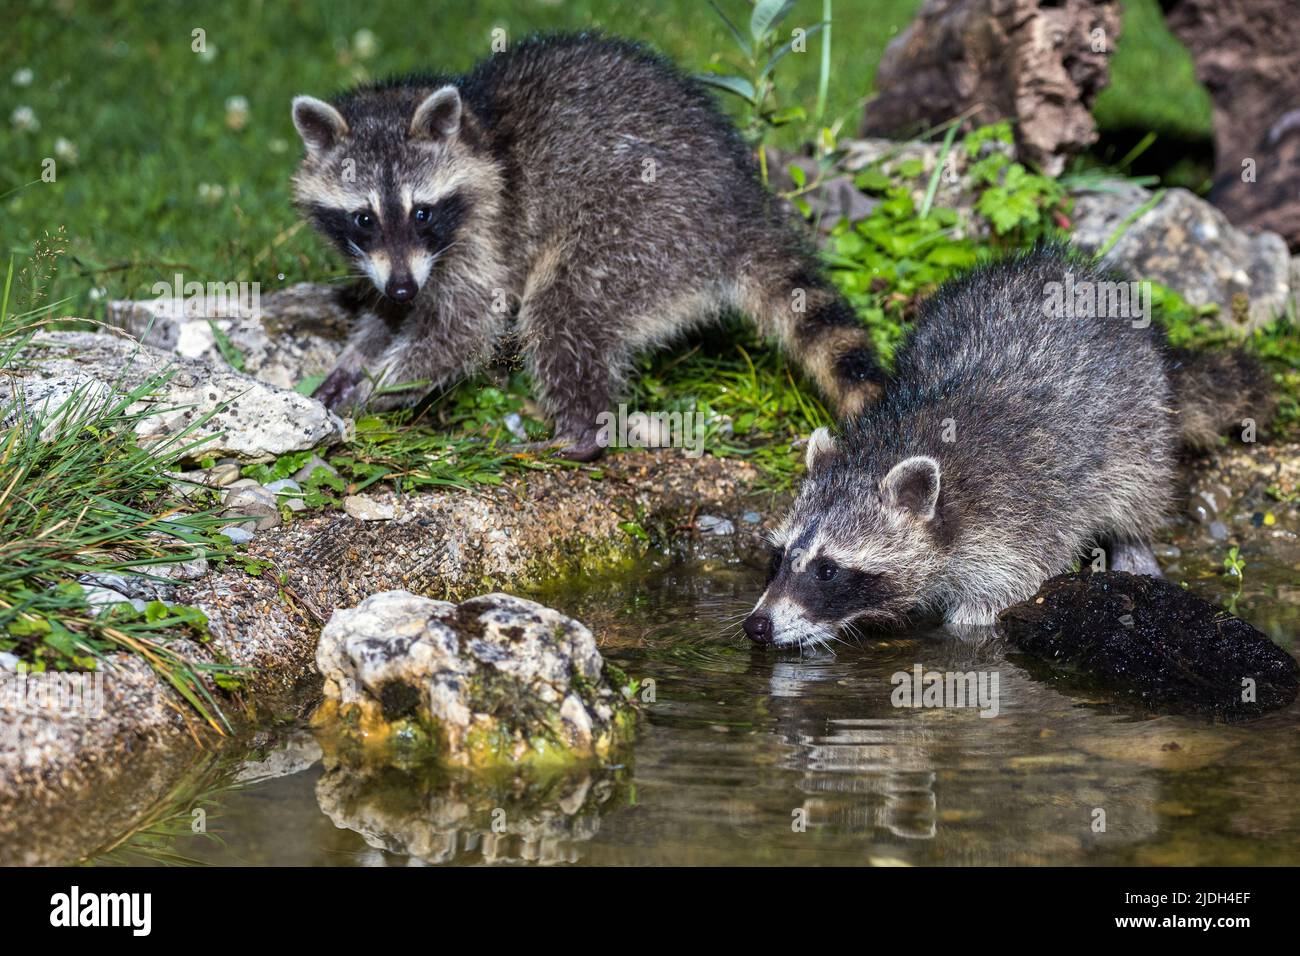 common raccoon (Procyon lotor), two young raccoons at a garden pond, Germany, Baden-Wuerttemberg Stock Photo